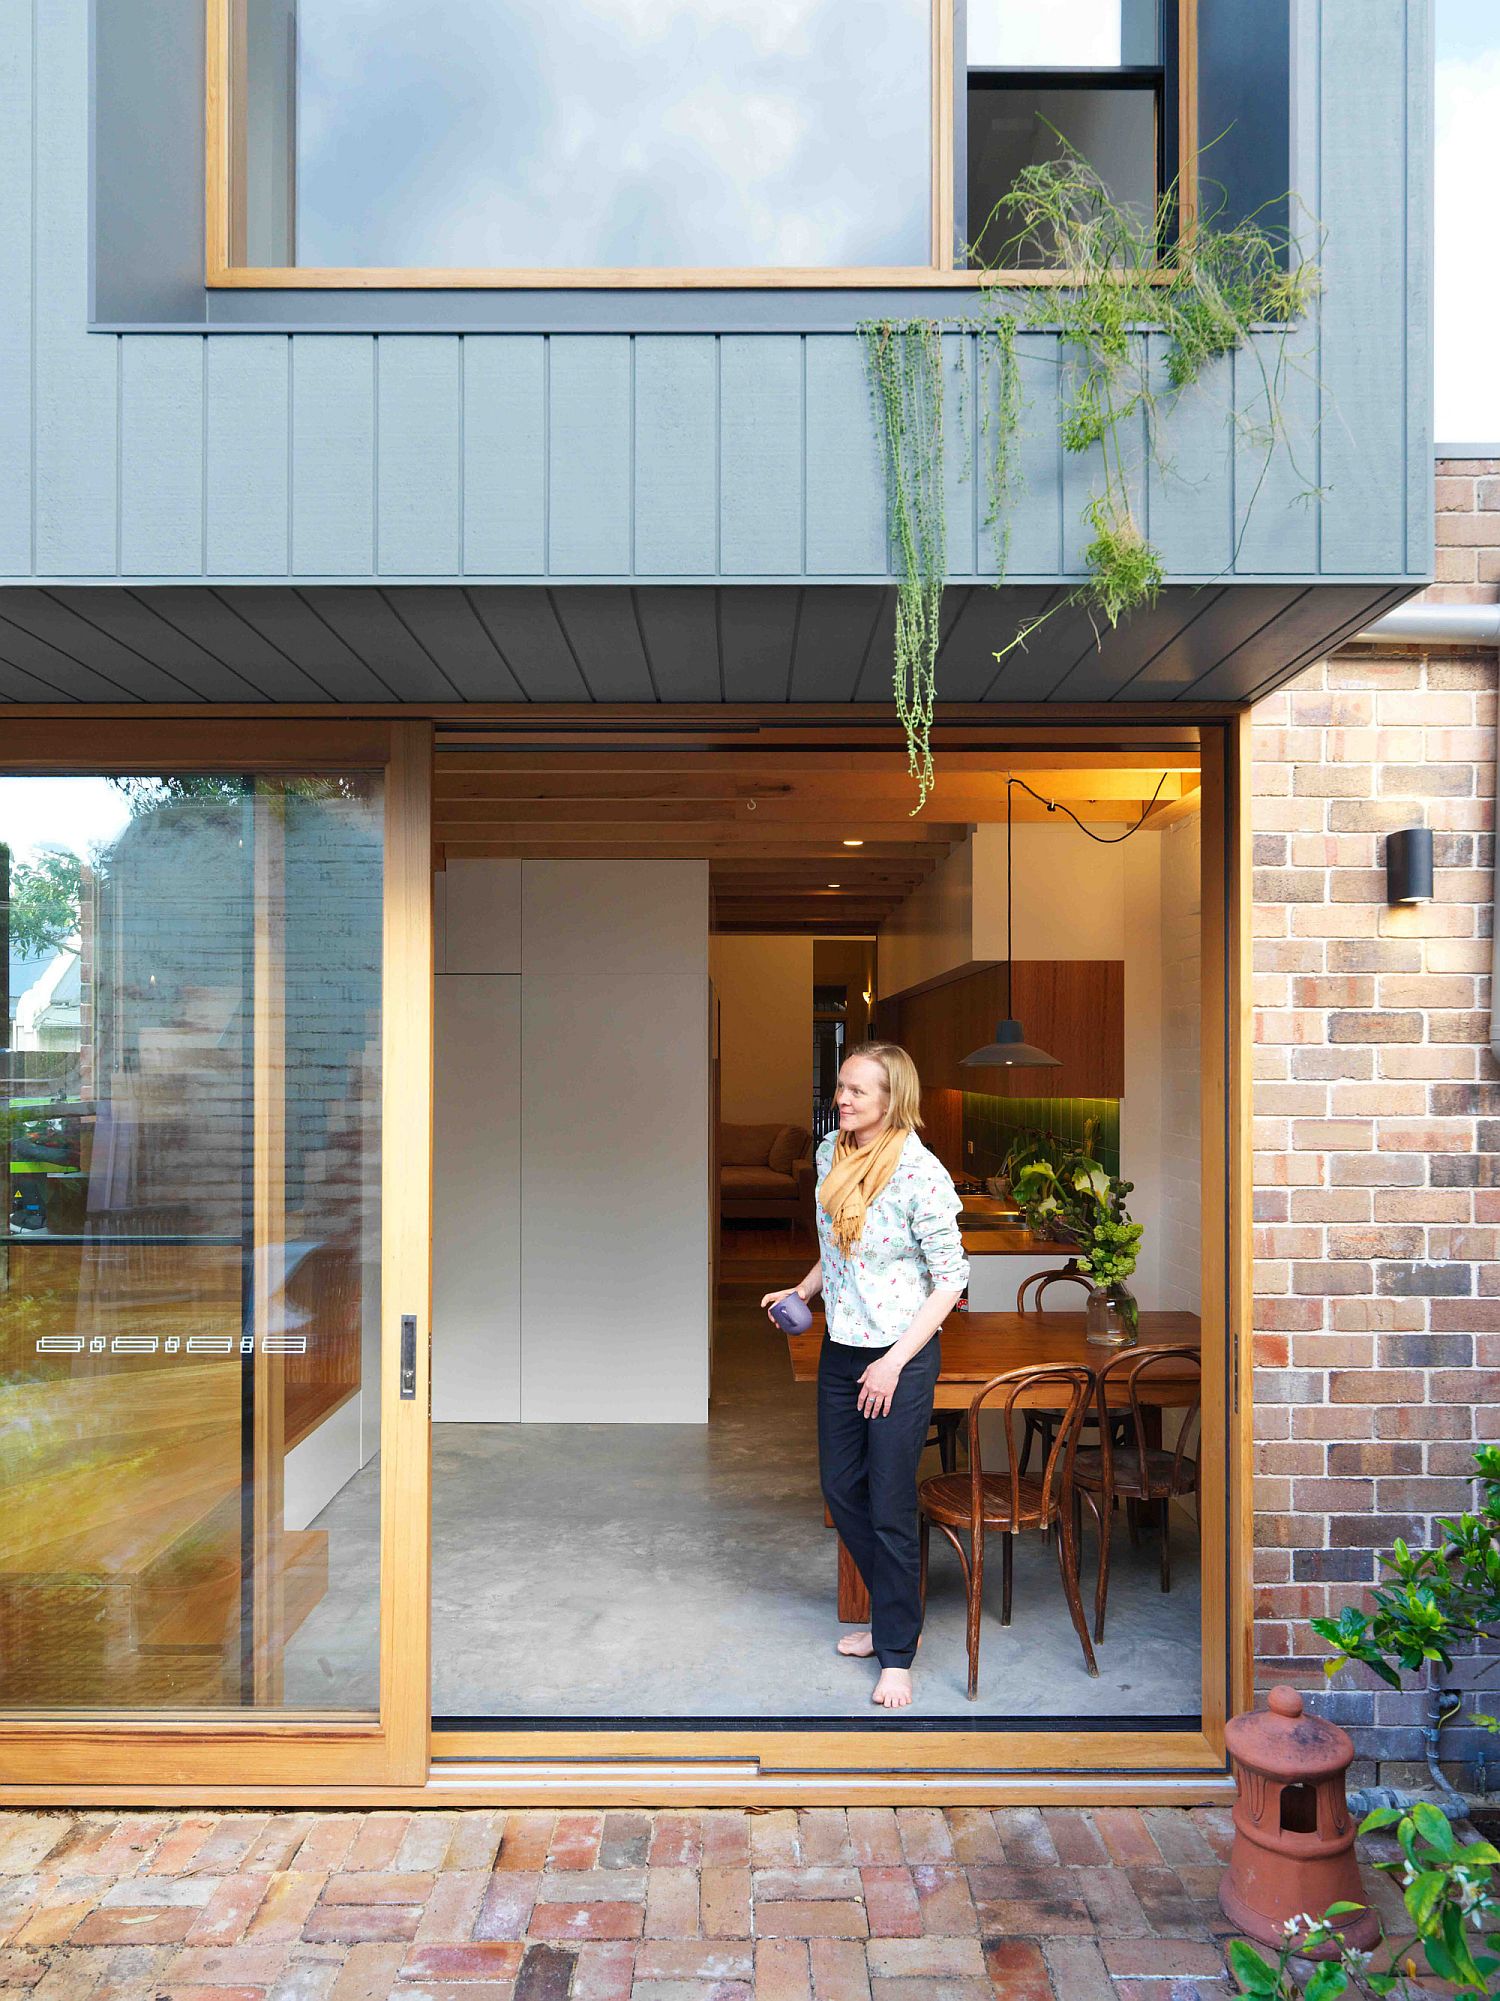 New-rear-second-level-extension-adds-space-to-the-small-house